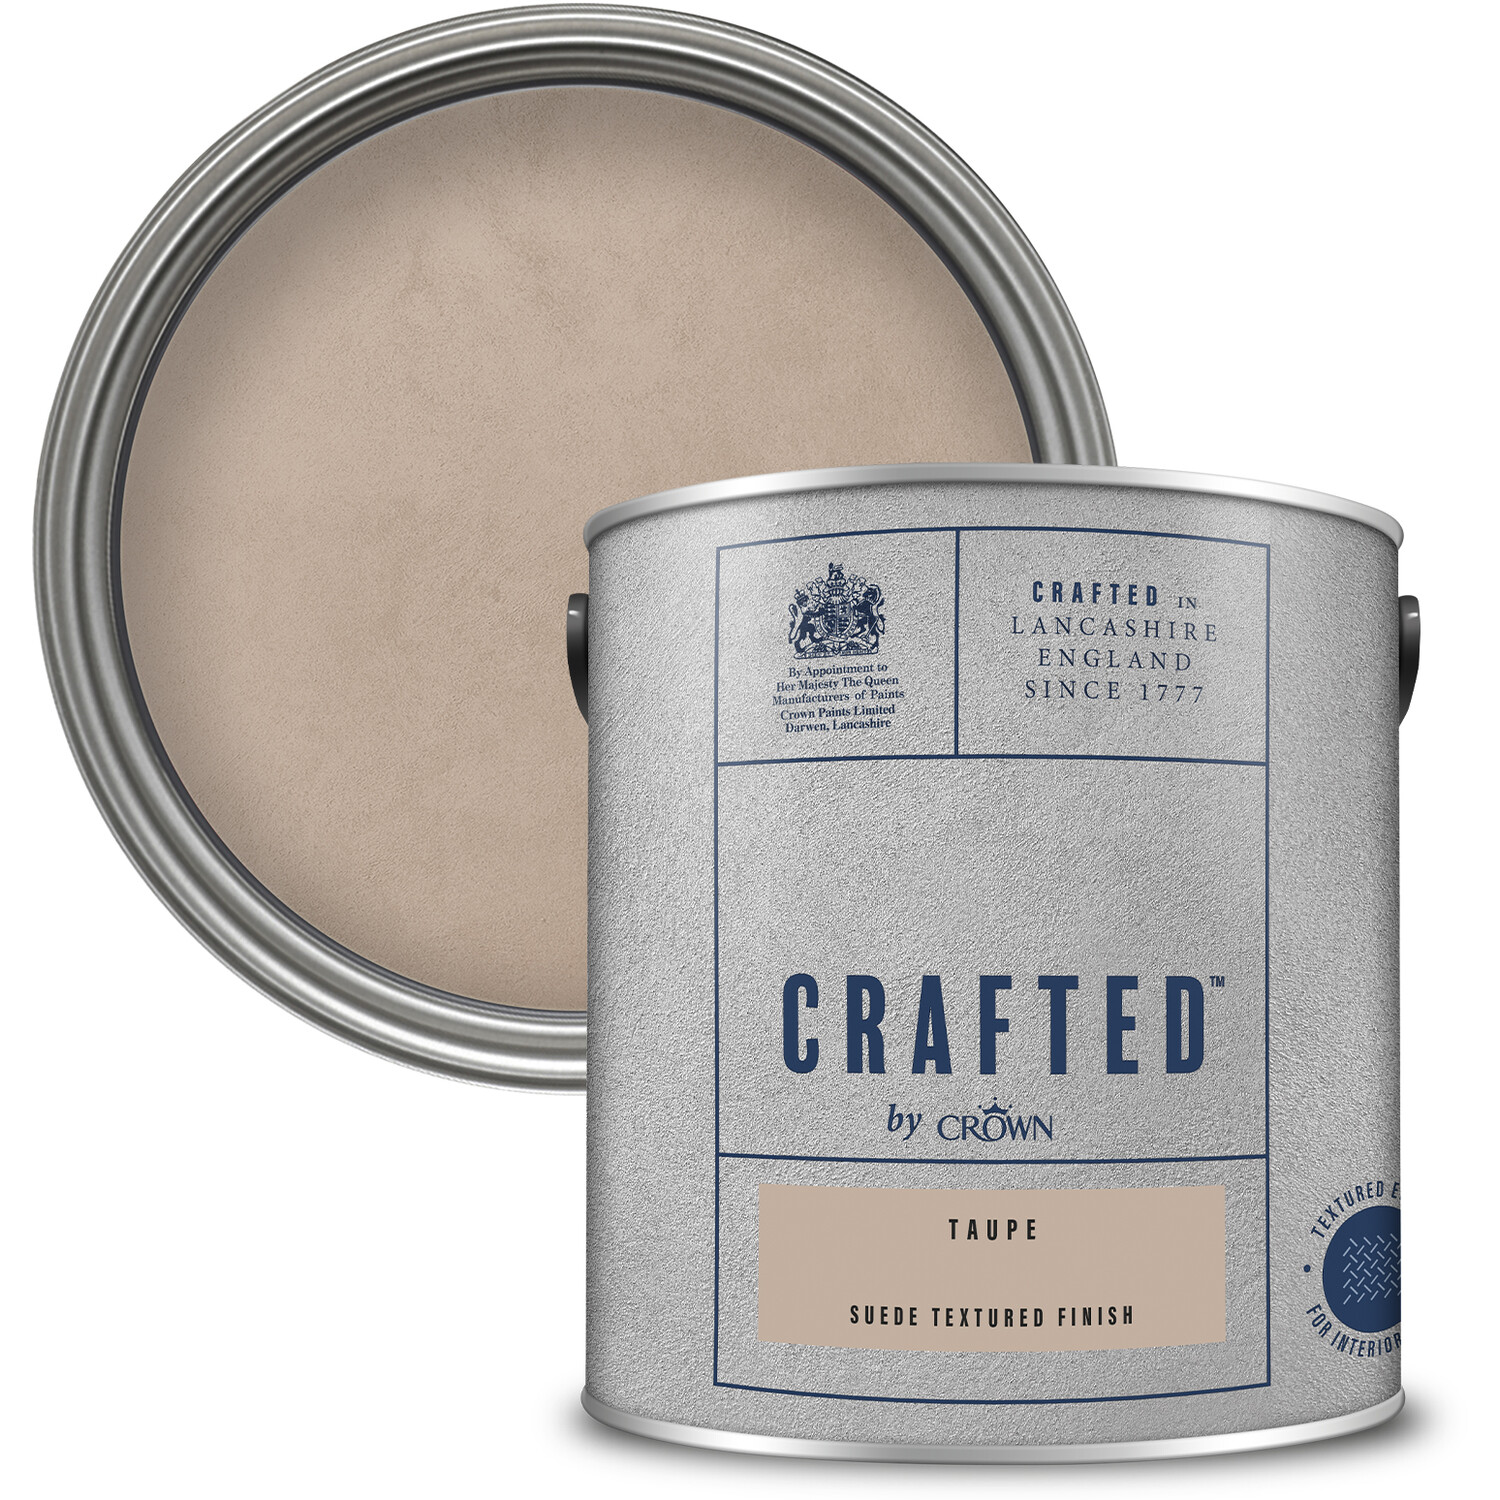 Crown Crafted Walls Taupe Suede Textured Finish Paint 2.5L Image 1